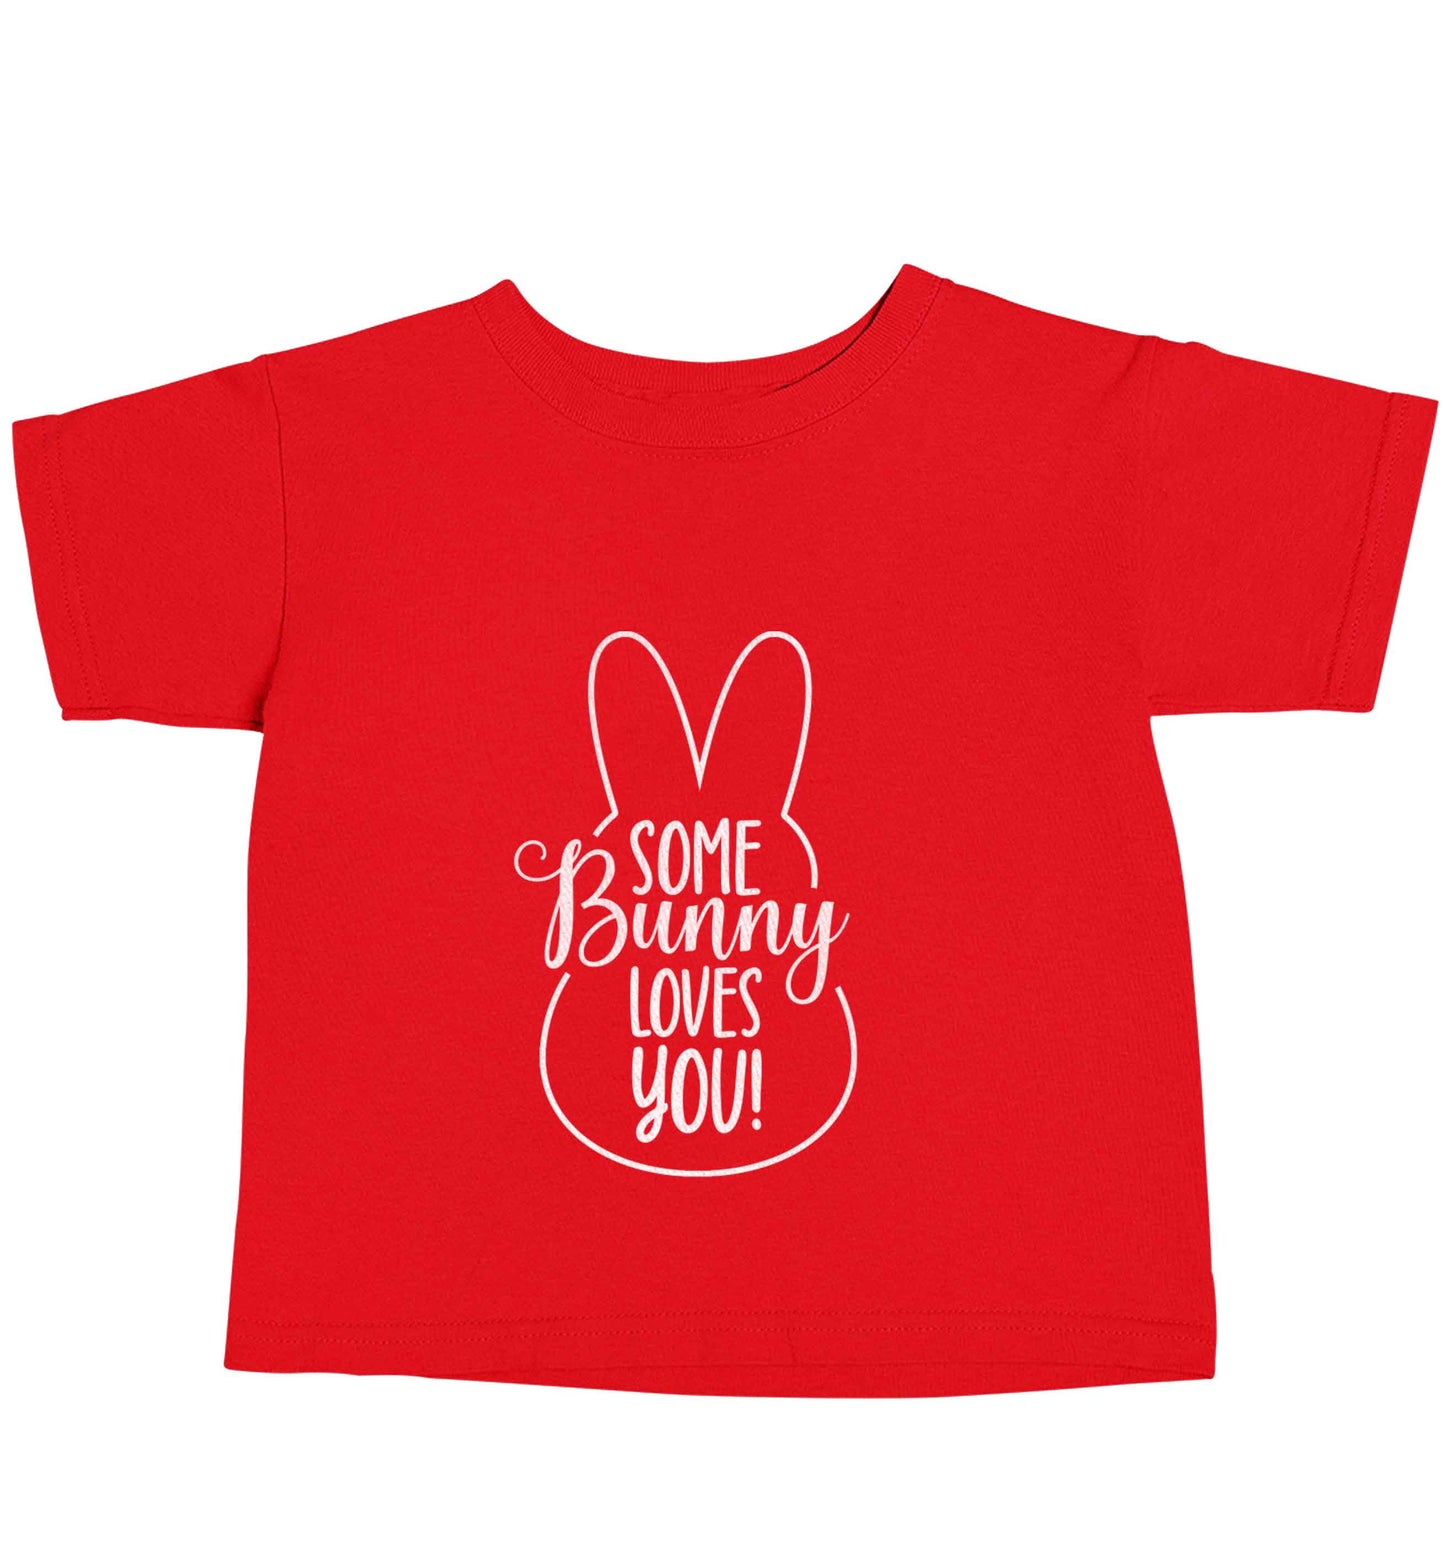 Some bunny loves you red baby toddler Tshirt 2 Years